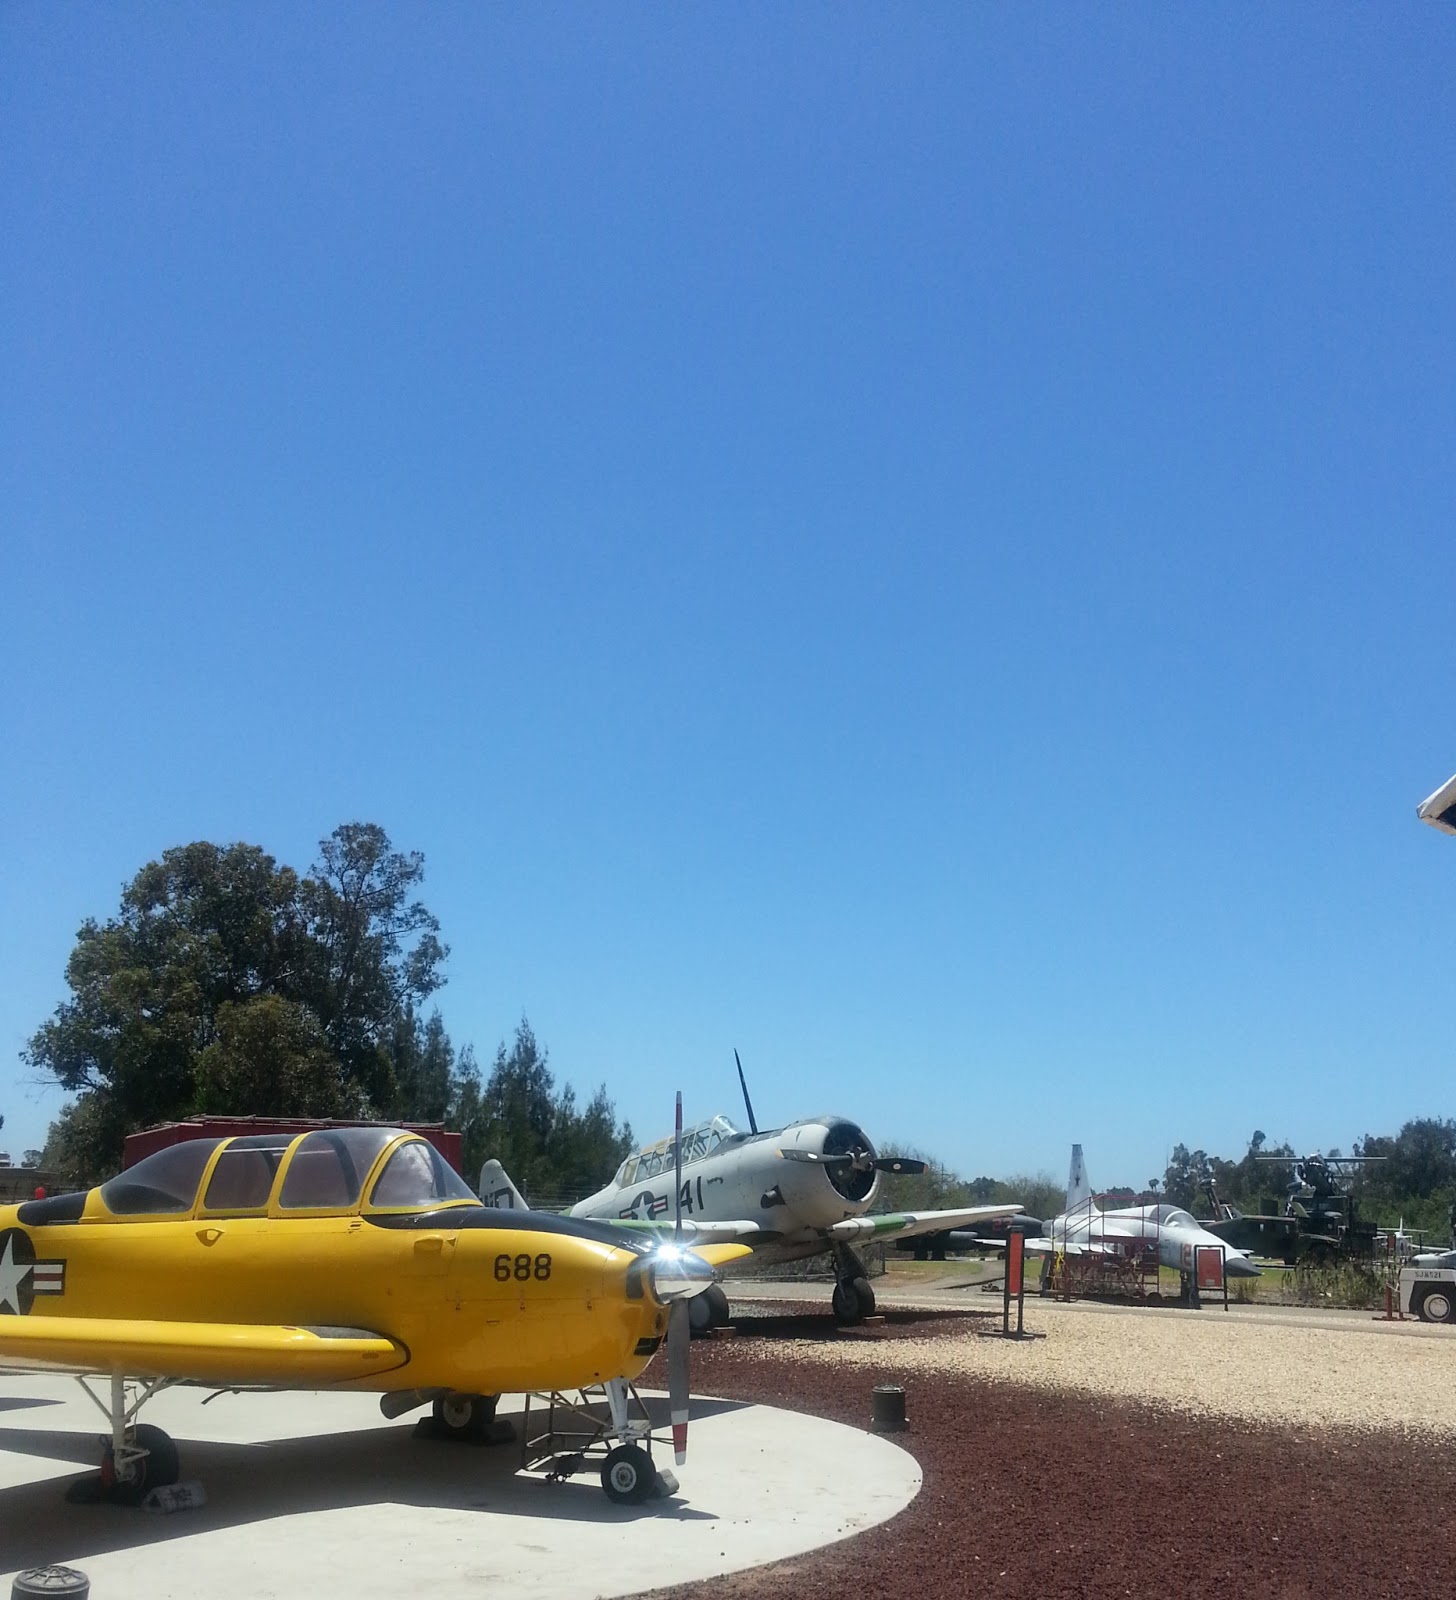 List 96+ Images flying leatherneck aviation museum san diego ca Updated